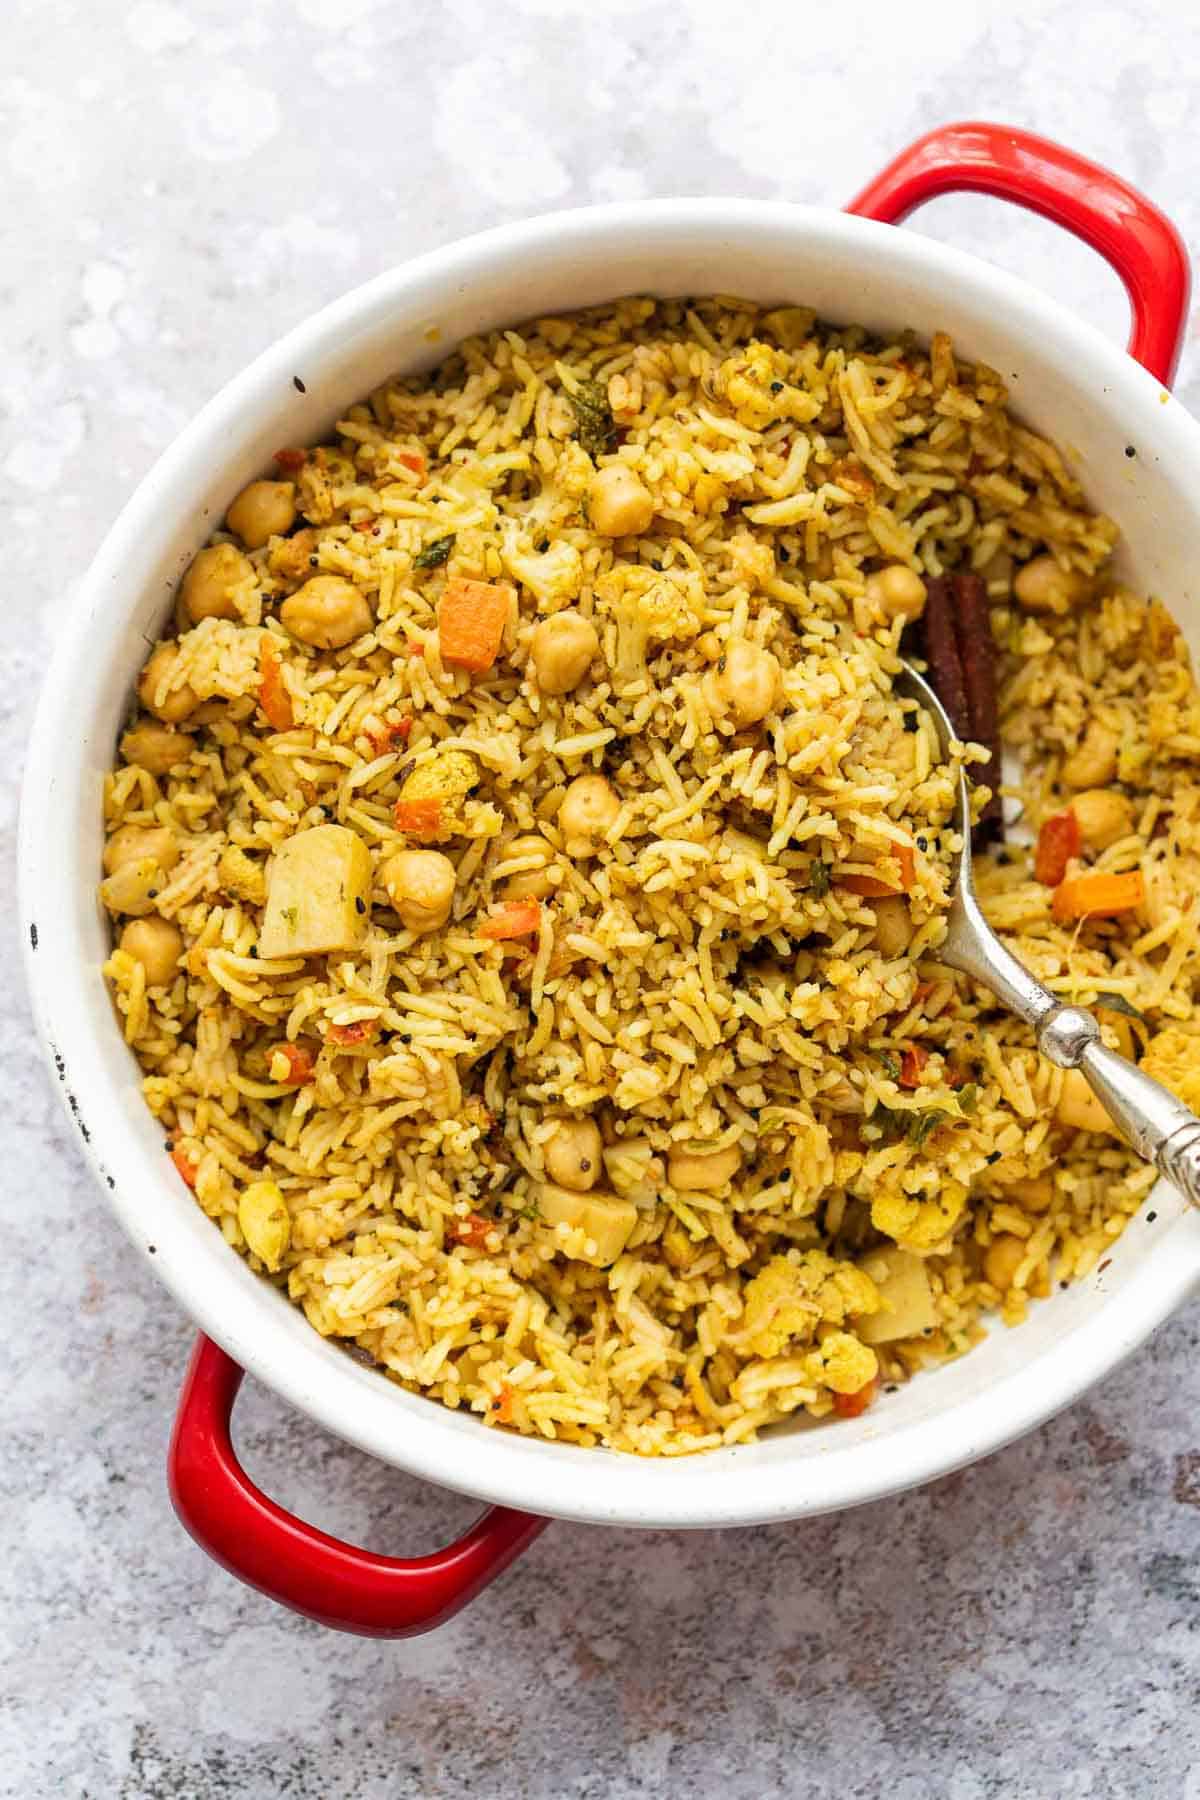 Kabuli chana pulao cooked in a pot